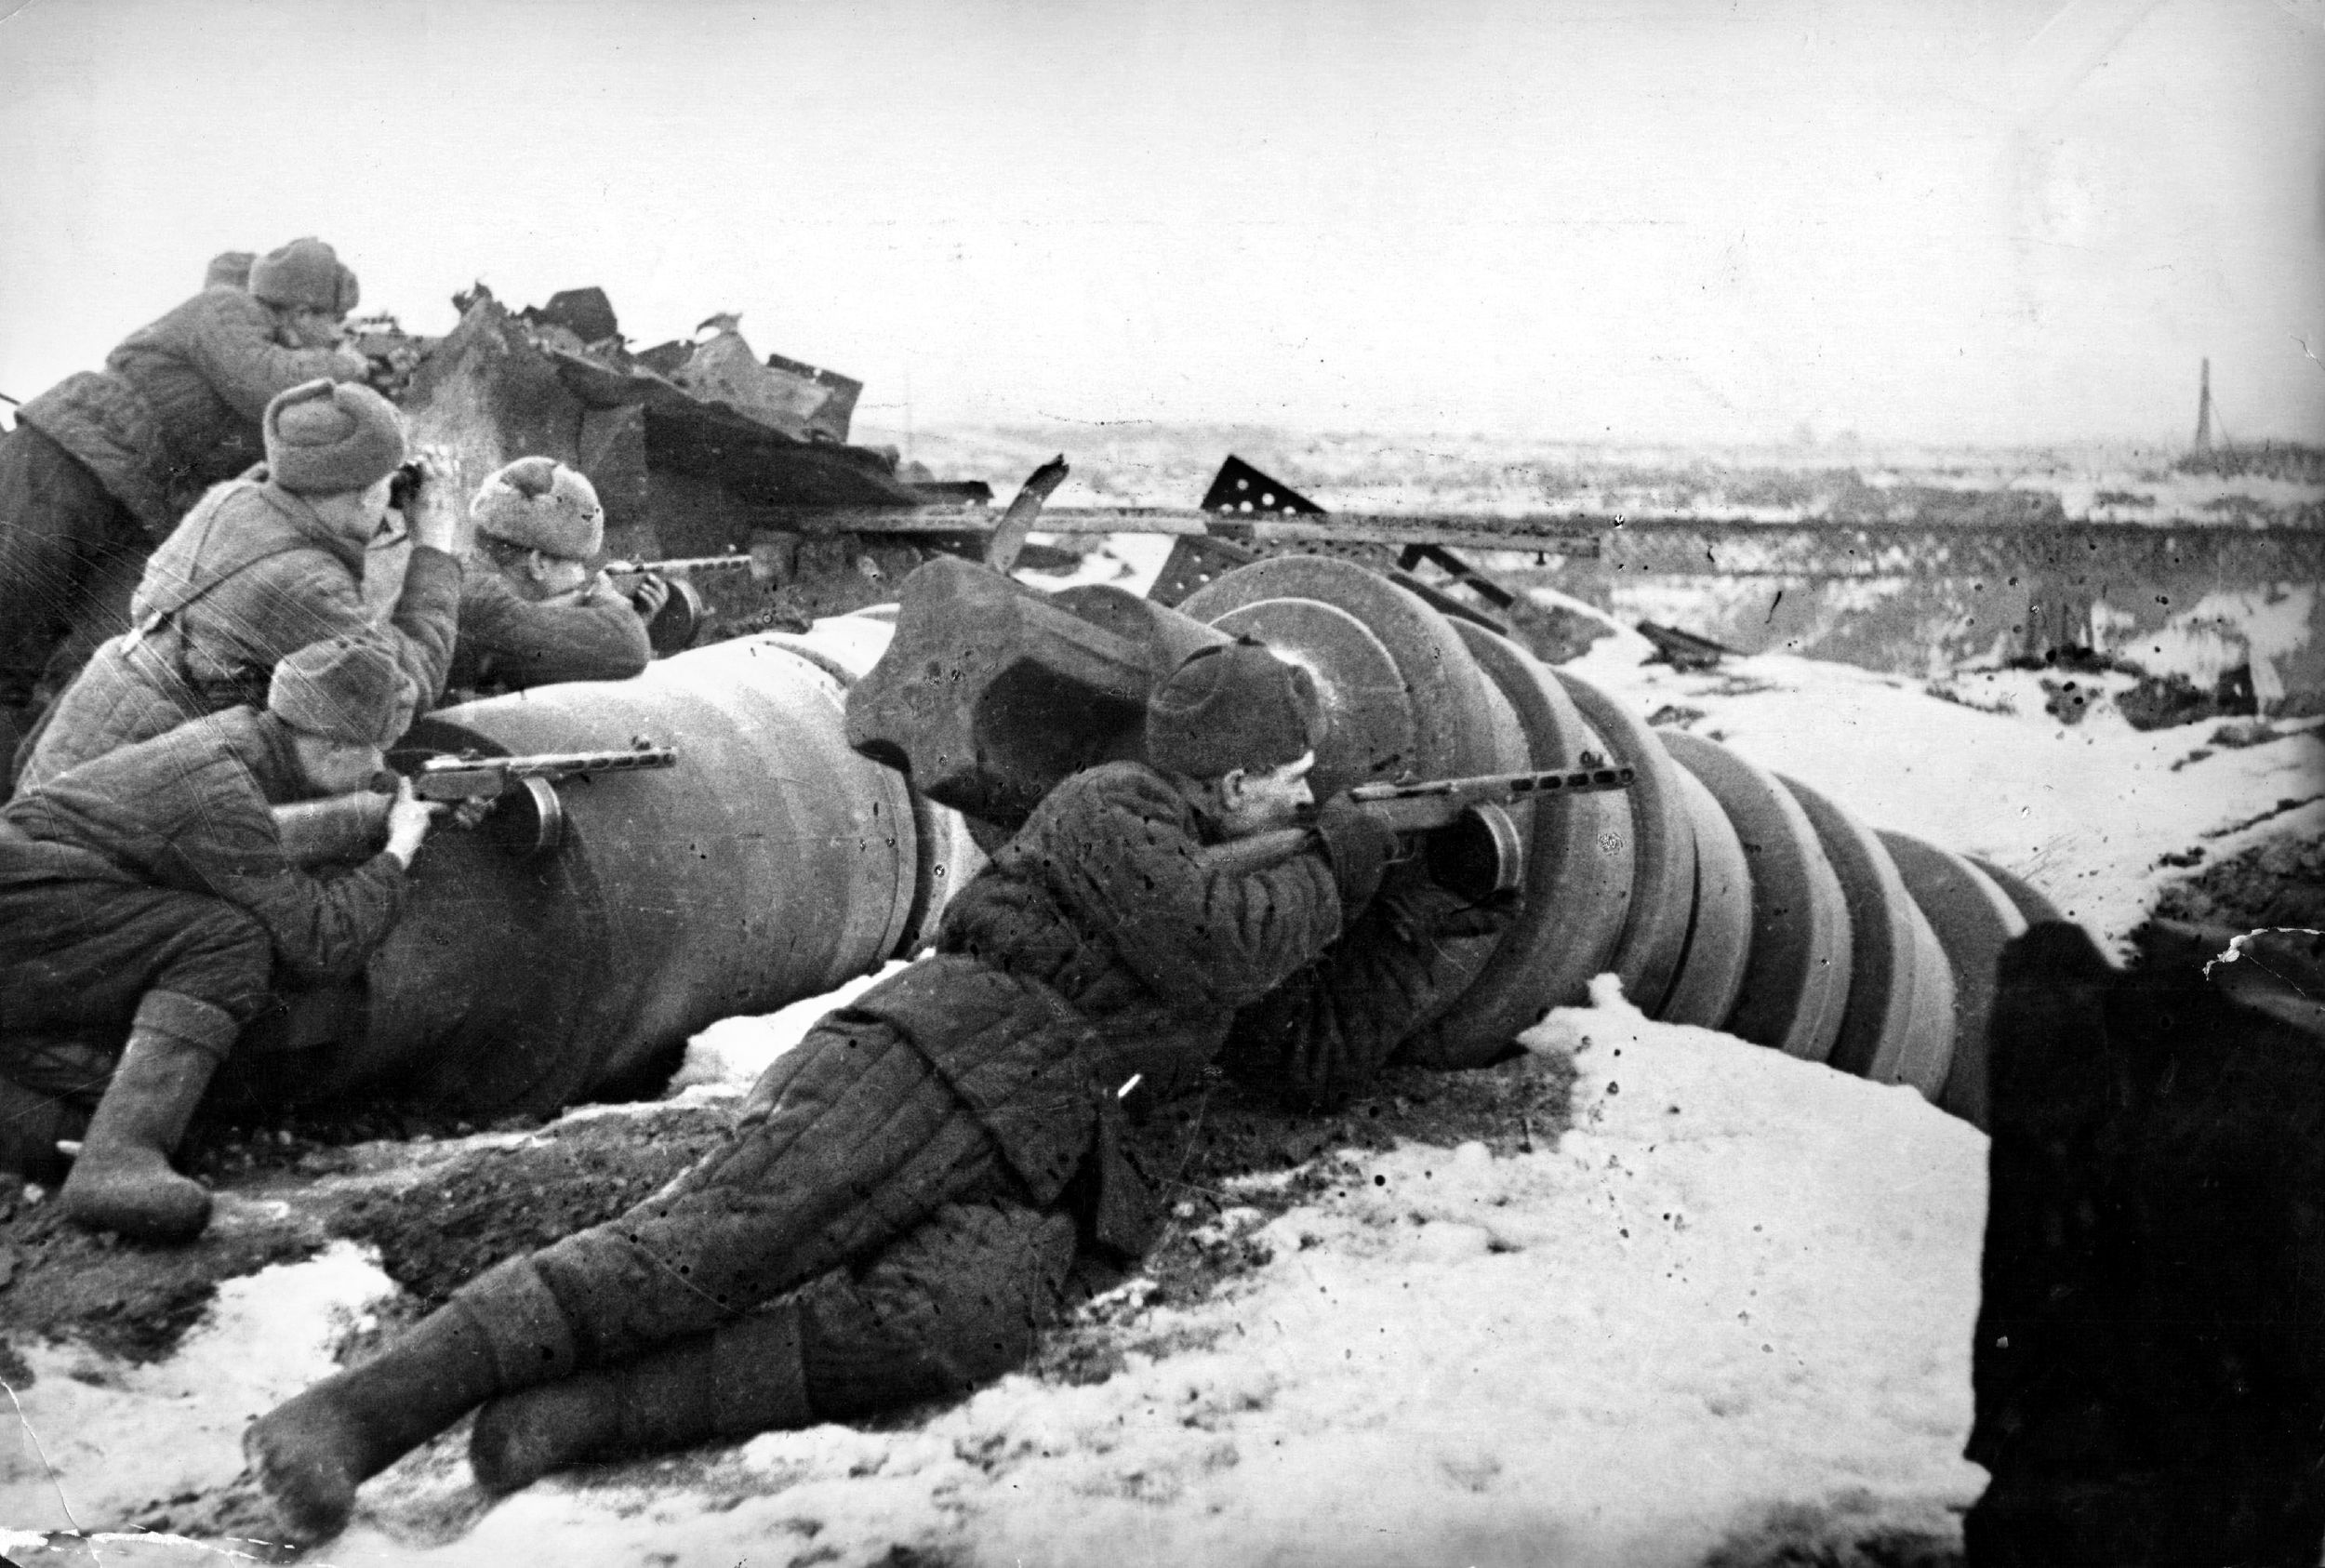 The Red October factory was destroyed during the fighting for control of Stalingrad, the industrial city on the banks of the Volga River. Here, Red Army soldiers take cover in the rubble as they prepare to fire on the German enemy.